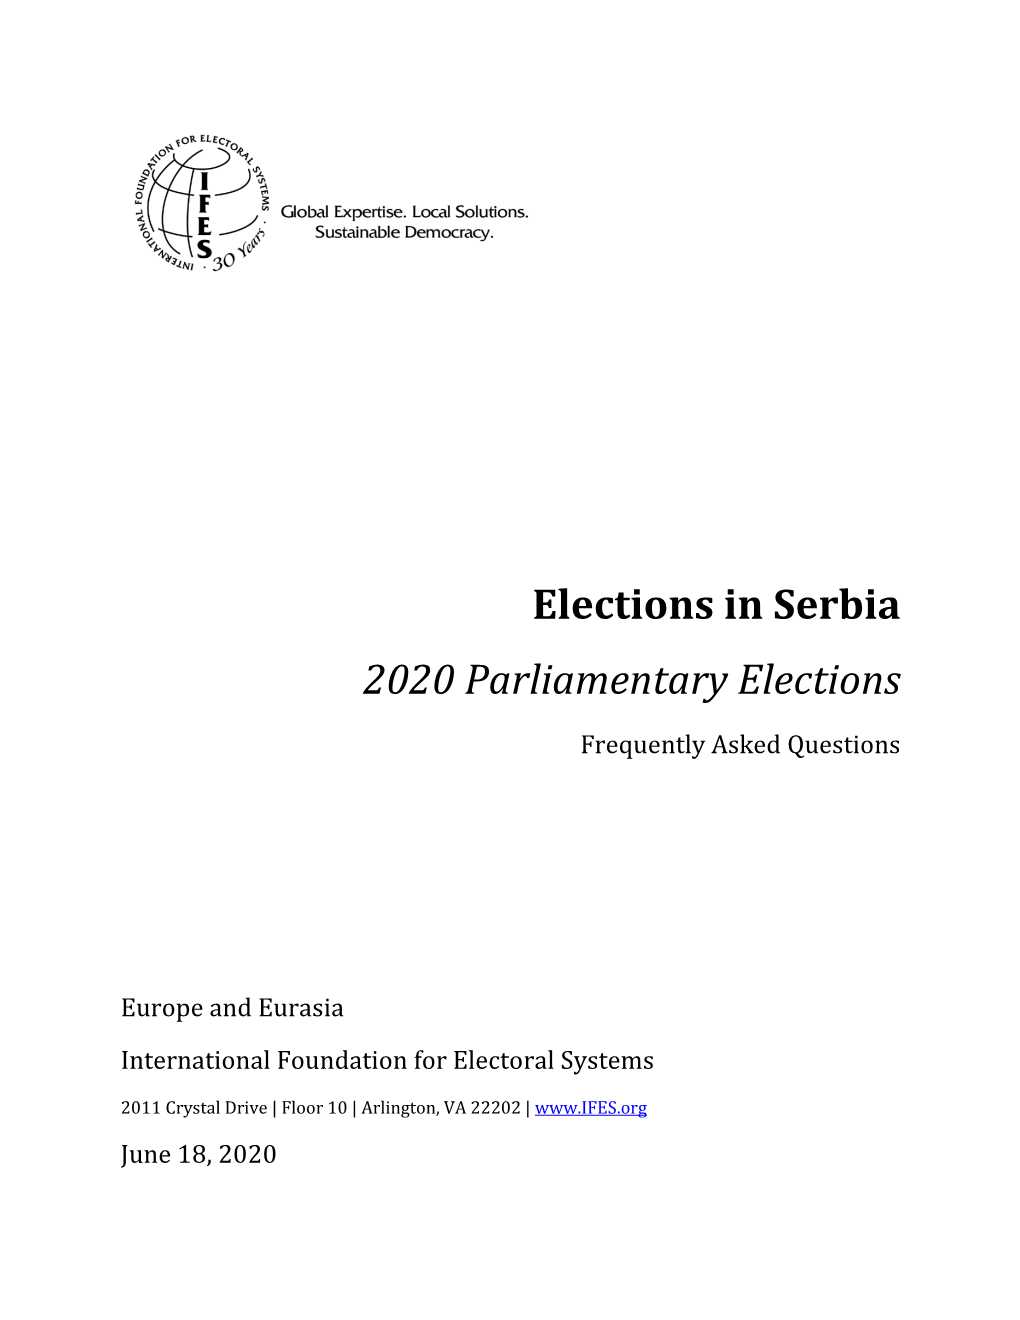 Elections in Serbia: 2020 Parliamentary Elections Frequently Asked Questions